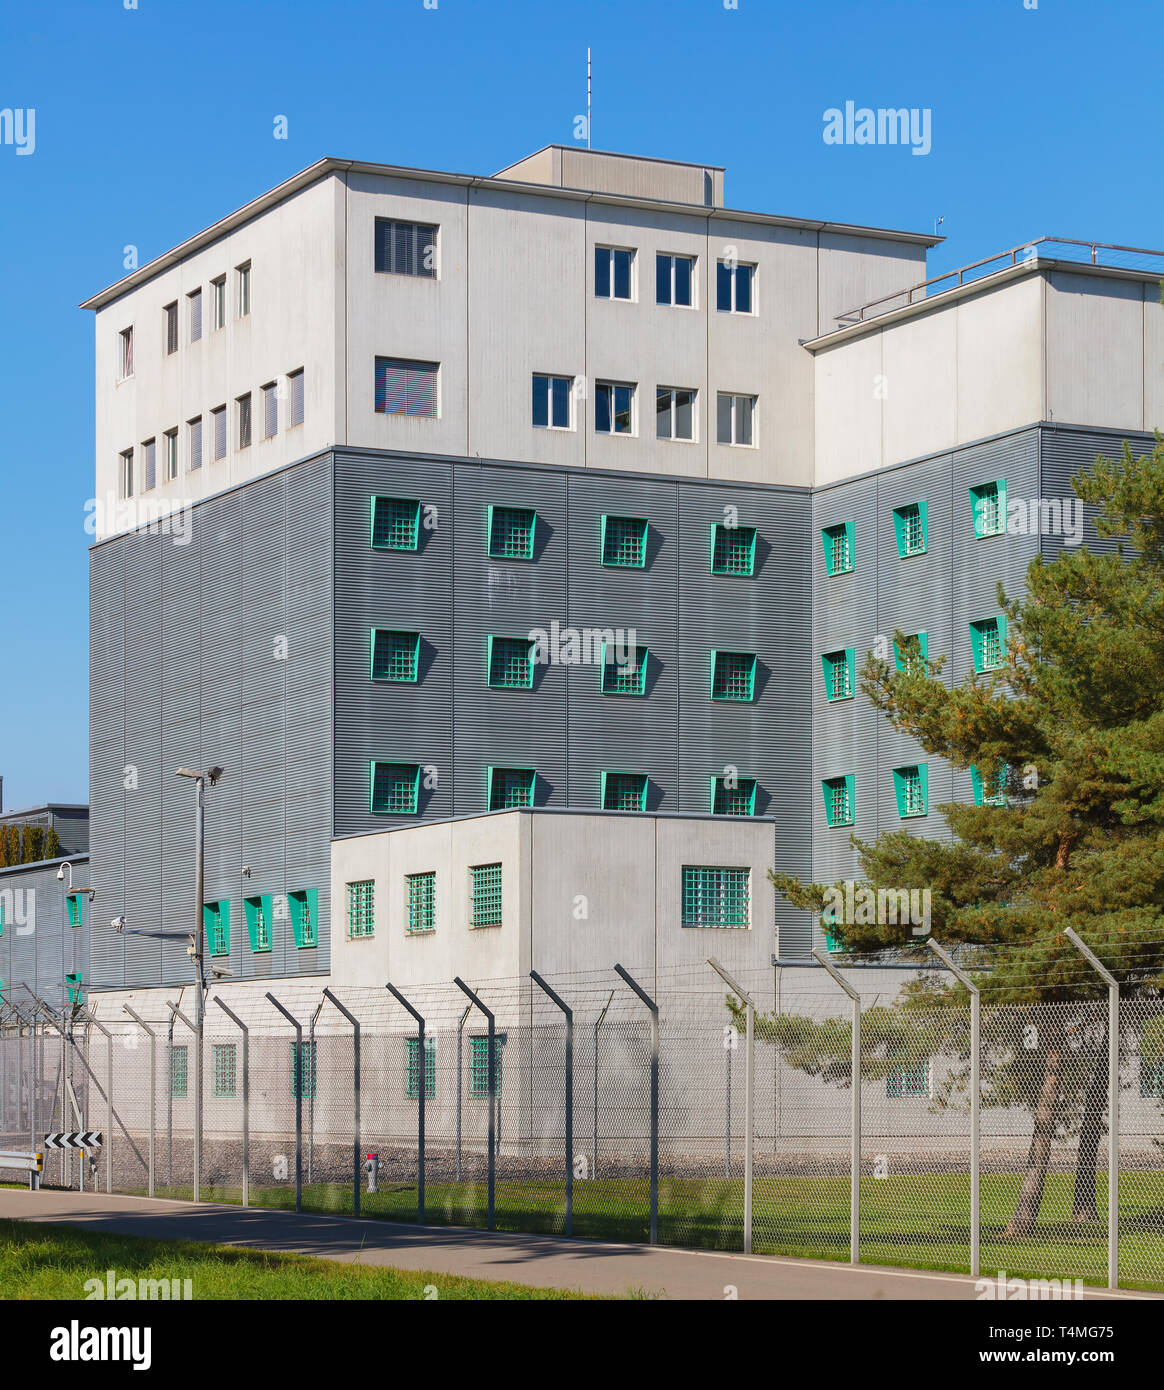 Kloten, Switzerland - September 30, 2016: the Zurich Airport Prison. The Zurich Airport Prison (German: Flughafengefangnis) is an extradition and rema Stock Photo